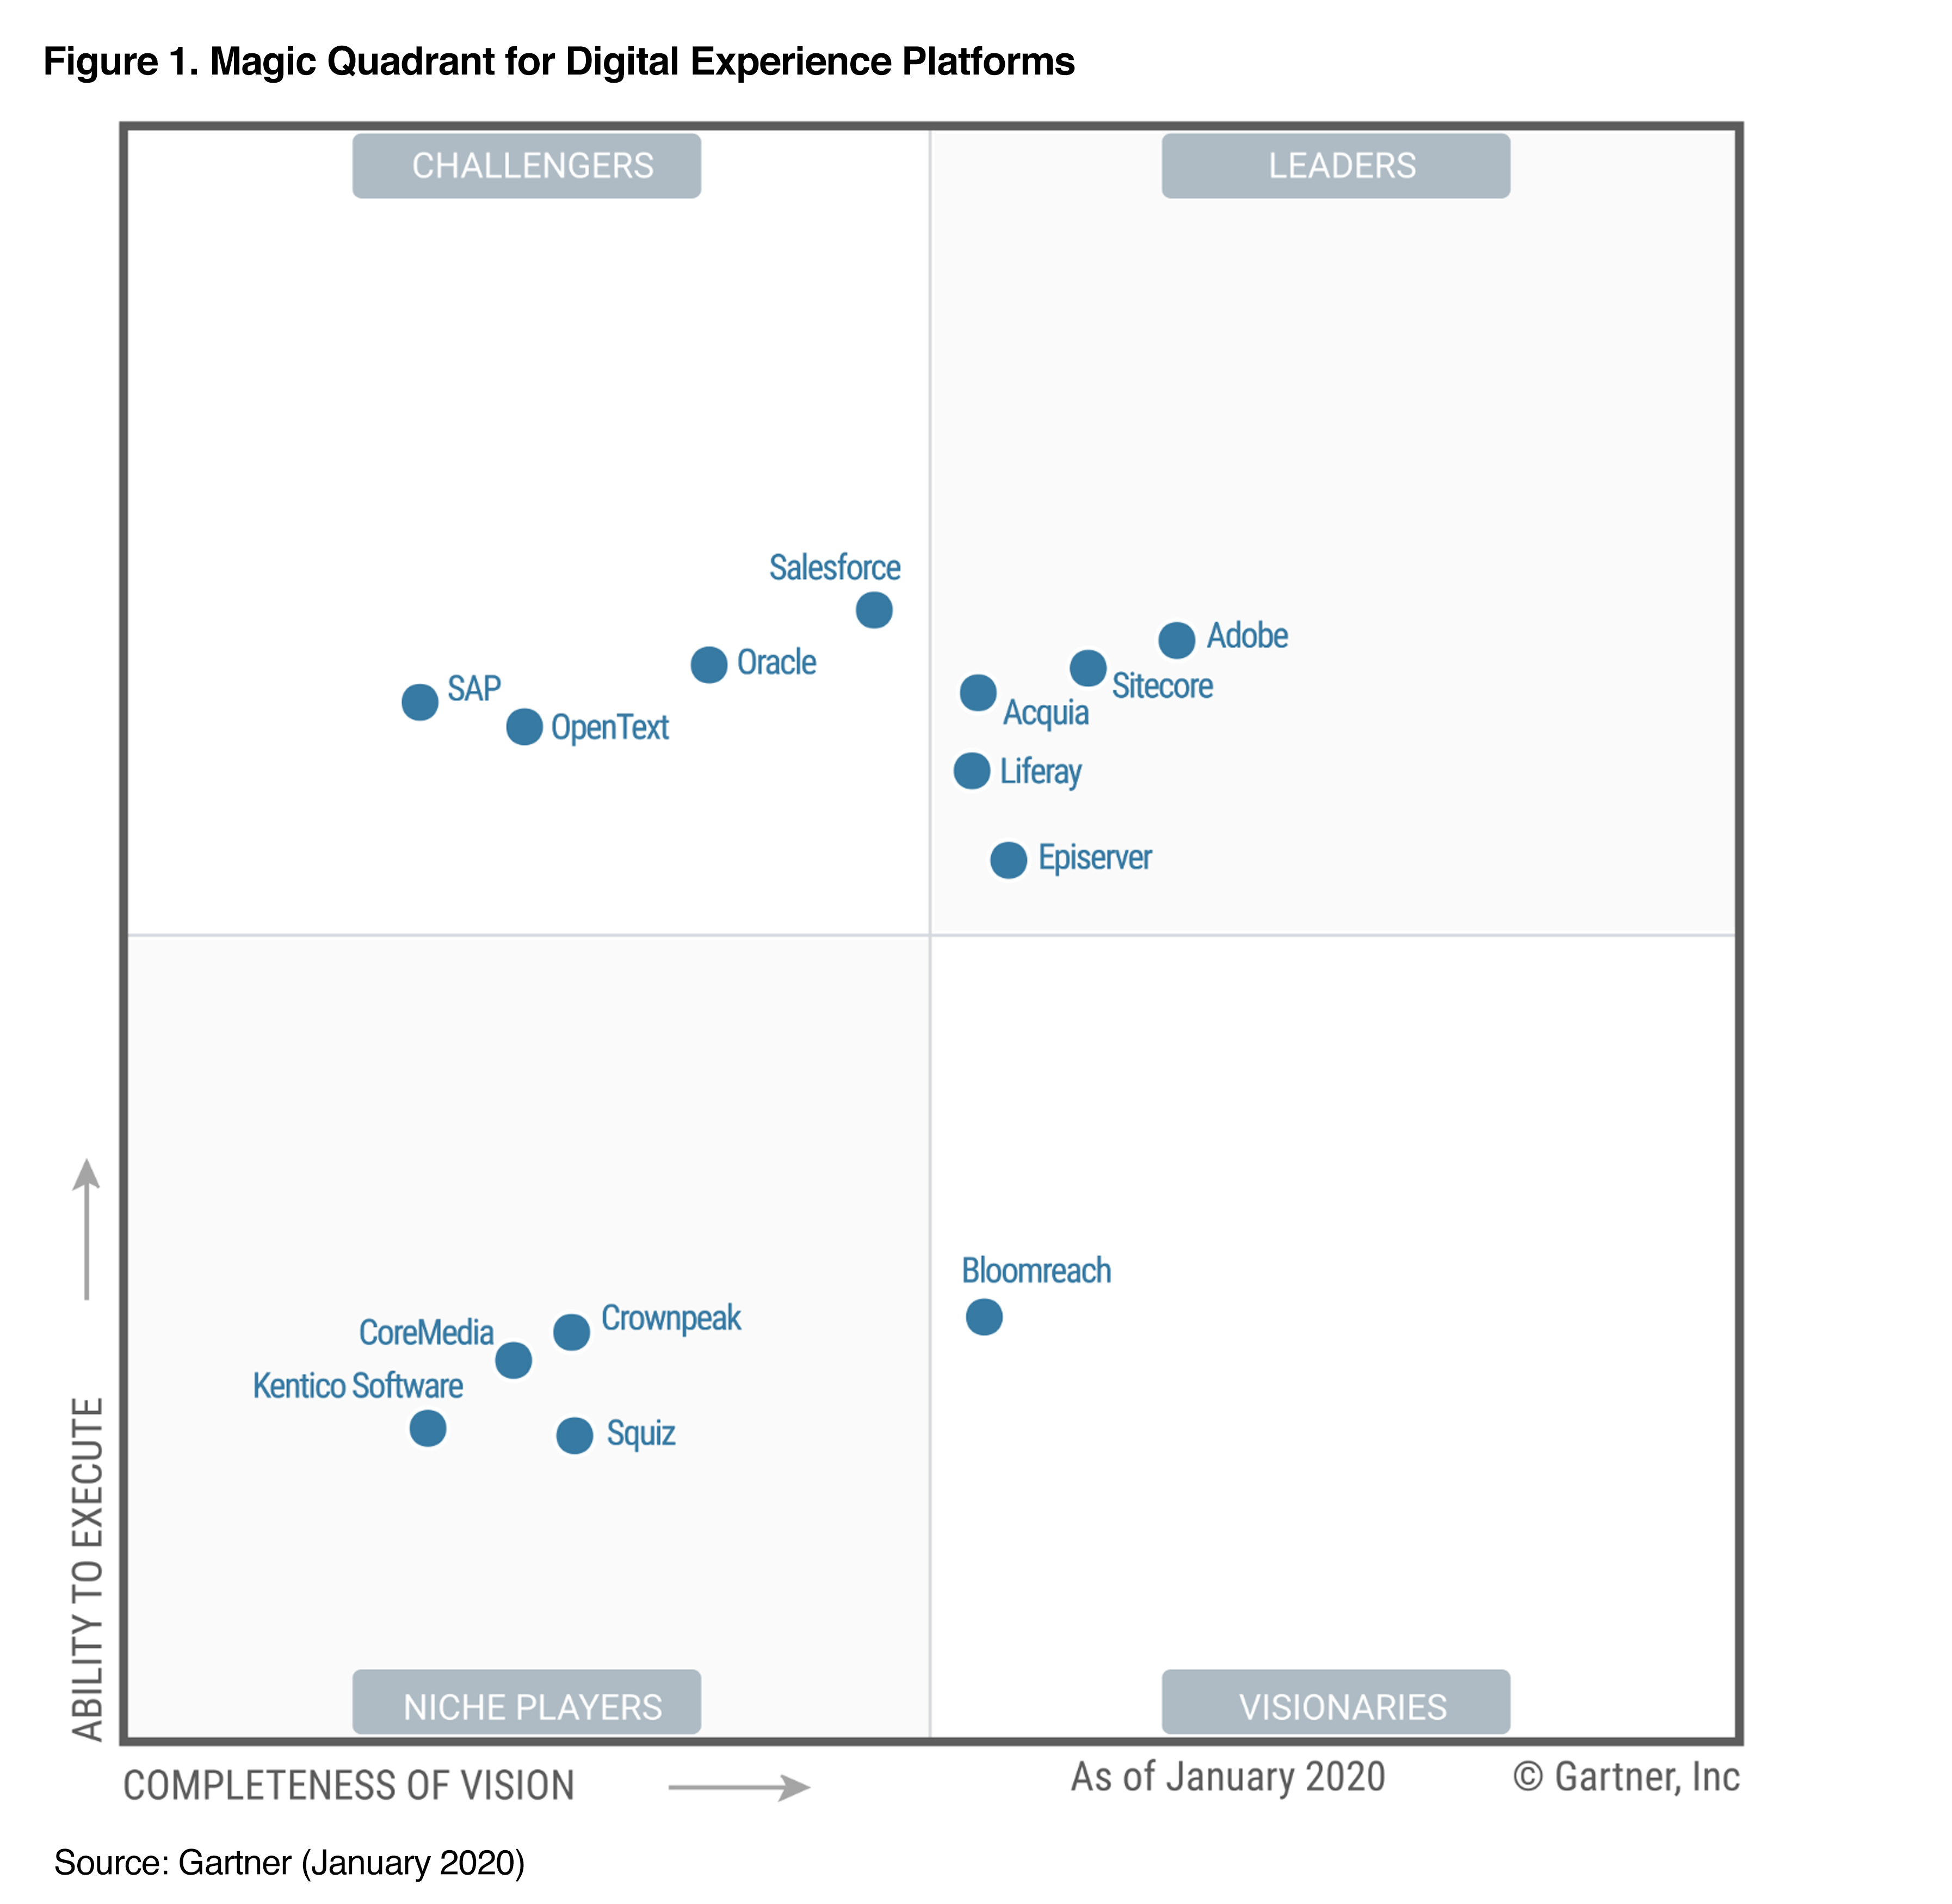 A graph showing the state of the Digital Experience Platforms in 2020. Vendors are plotted on a grid based on their ability to execute and completeness of vision. Acquia is placed in the 'Leaders' quadrant, indicating strong performance in both vision and execution.